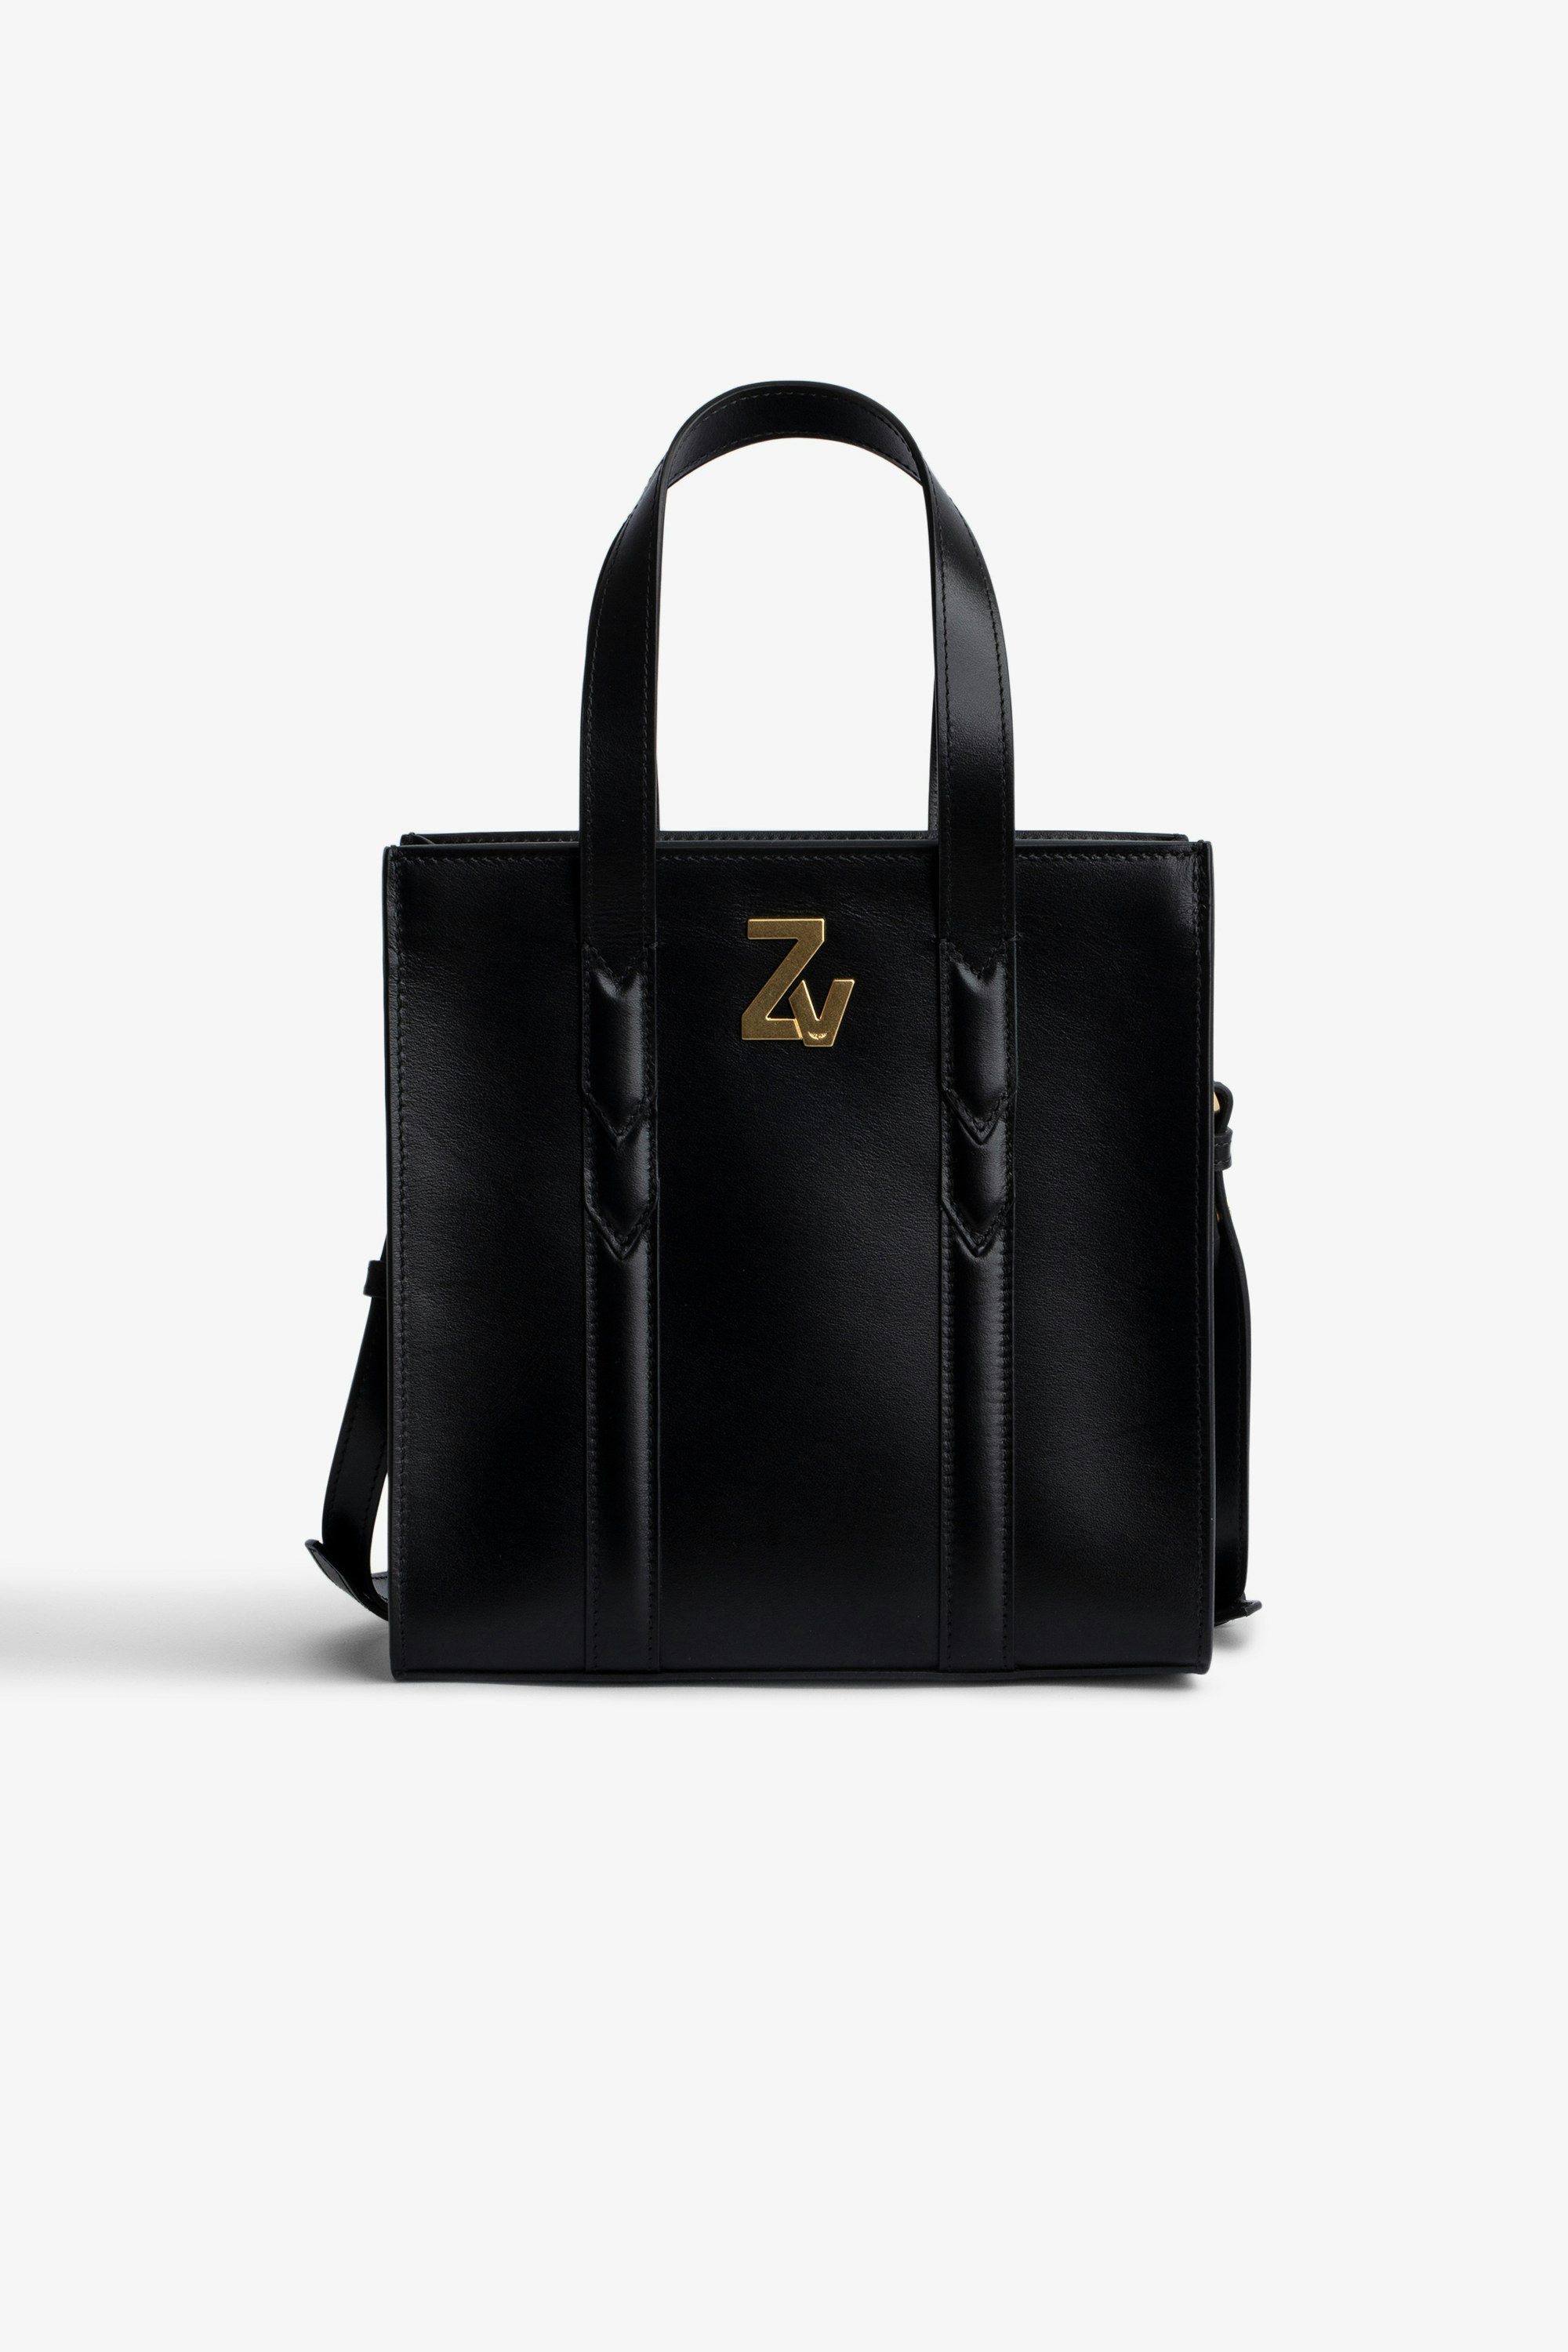 Sac ZV Initiale Le Small Tote Sac ZV Initiale Le Small Tote sac noir femme